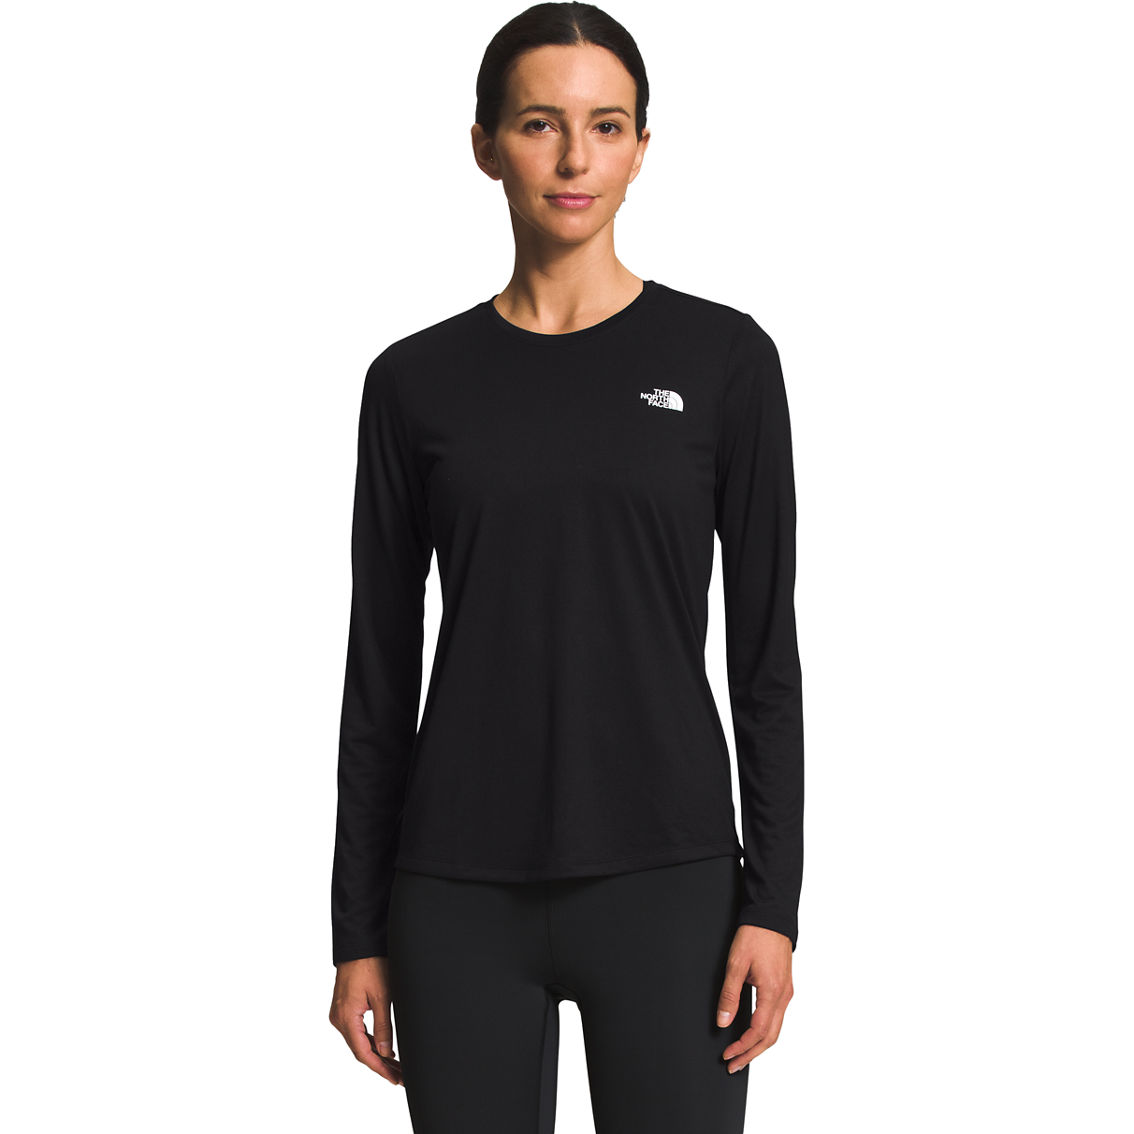 The North Face Elevation Shirt - Image 5 of 7